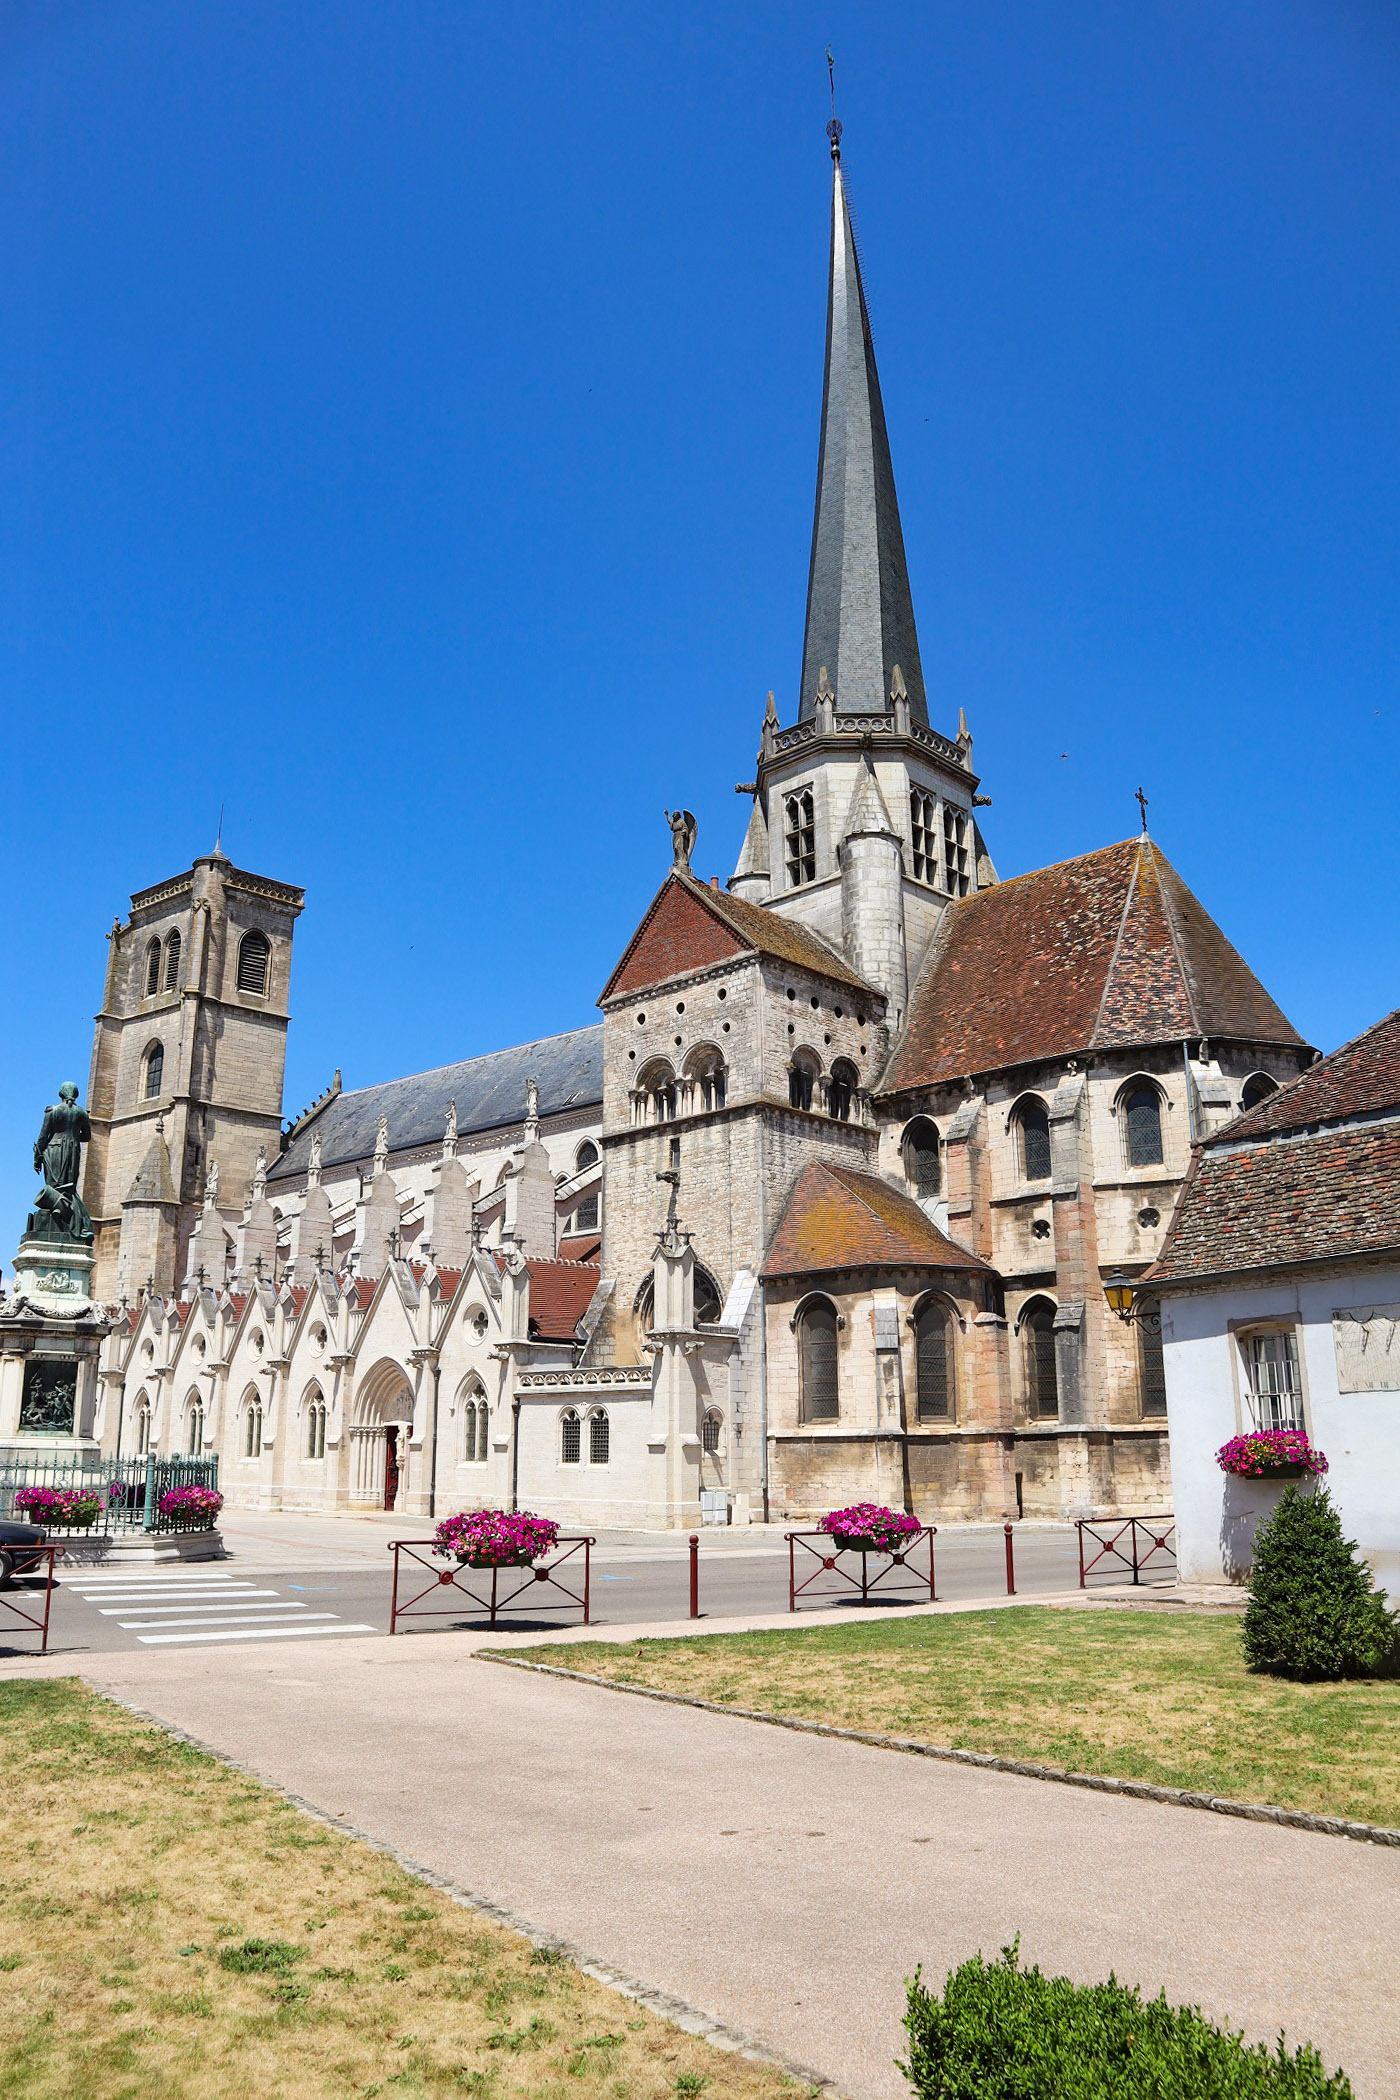 Around Dijon - Auxonne © GO69 - licence [CC BY-SA 4.0] from Wikimedia Commons